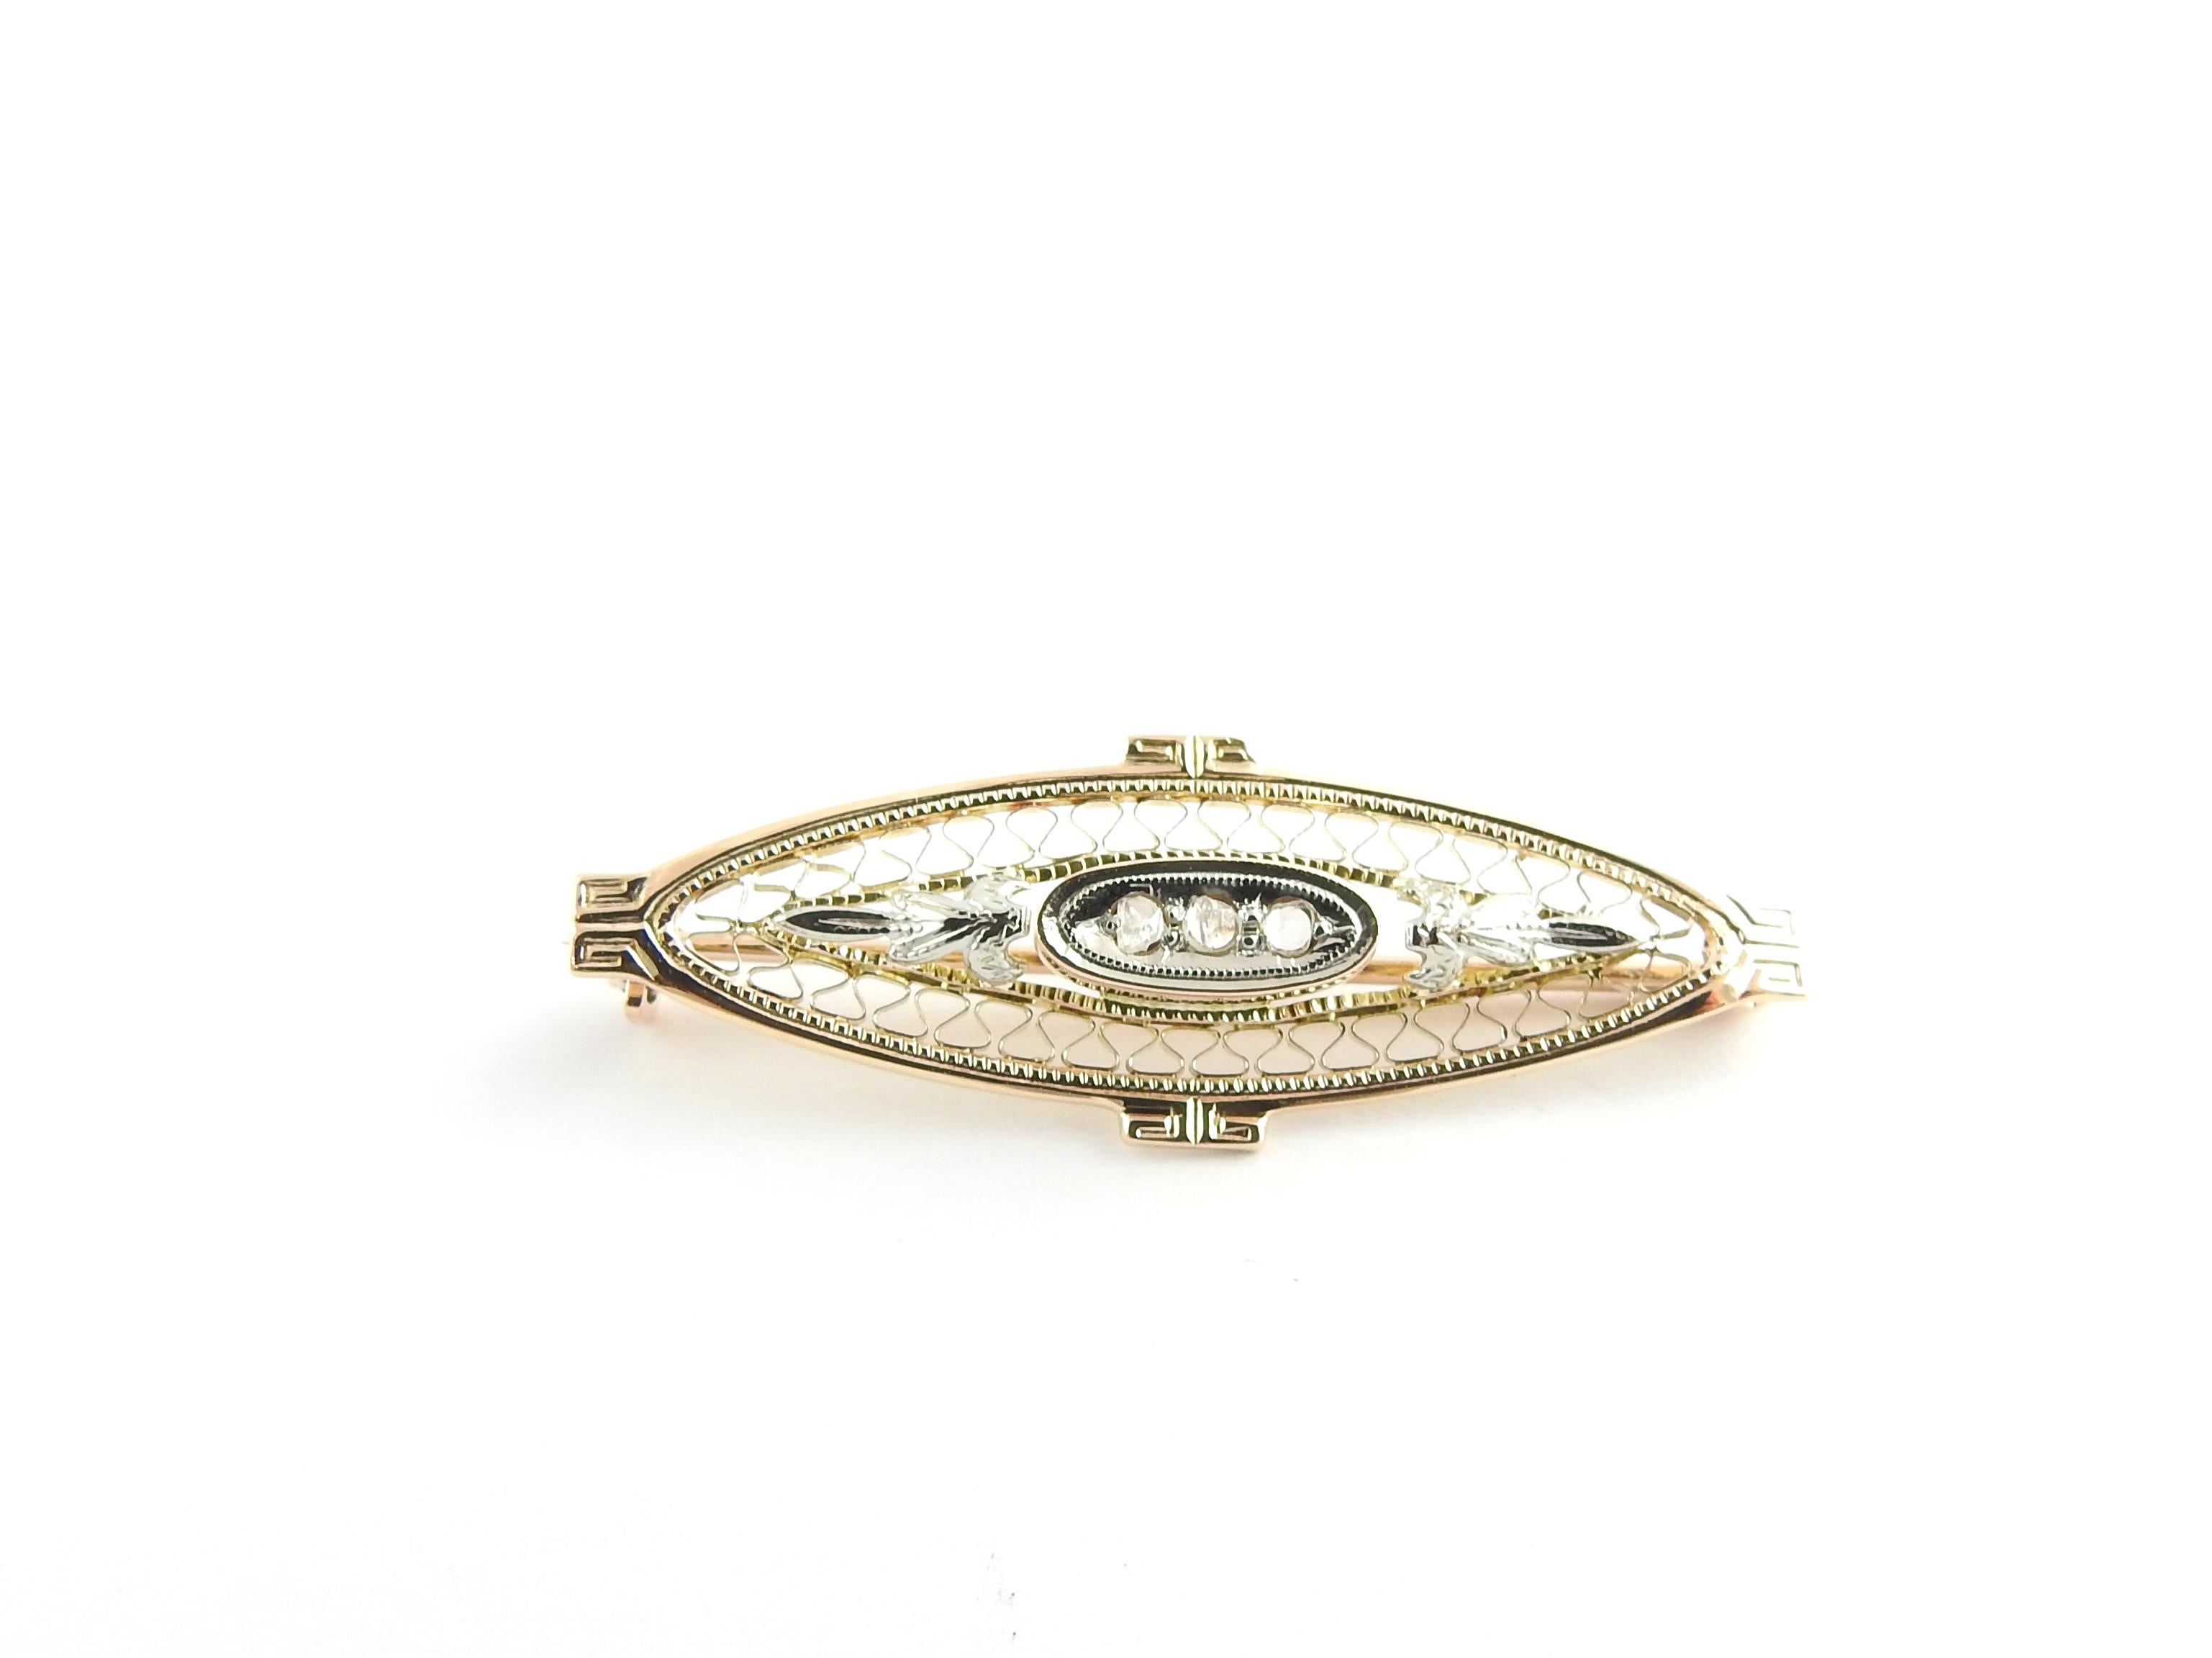 Vintage 10 Karat Yellow and White Gold Filigree and Diamond Brooch/Pin

This lovely brooch features three rose cut diamonds set in beautifully detailed yellow and white gold filigree.

Diamond color: I

Diamond clarity: I1

Size: 38 mm x 13